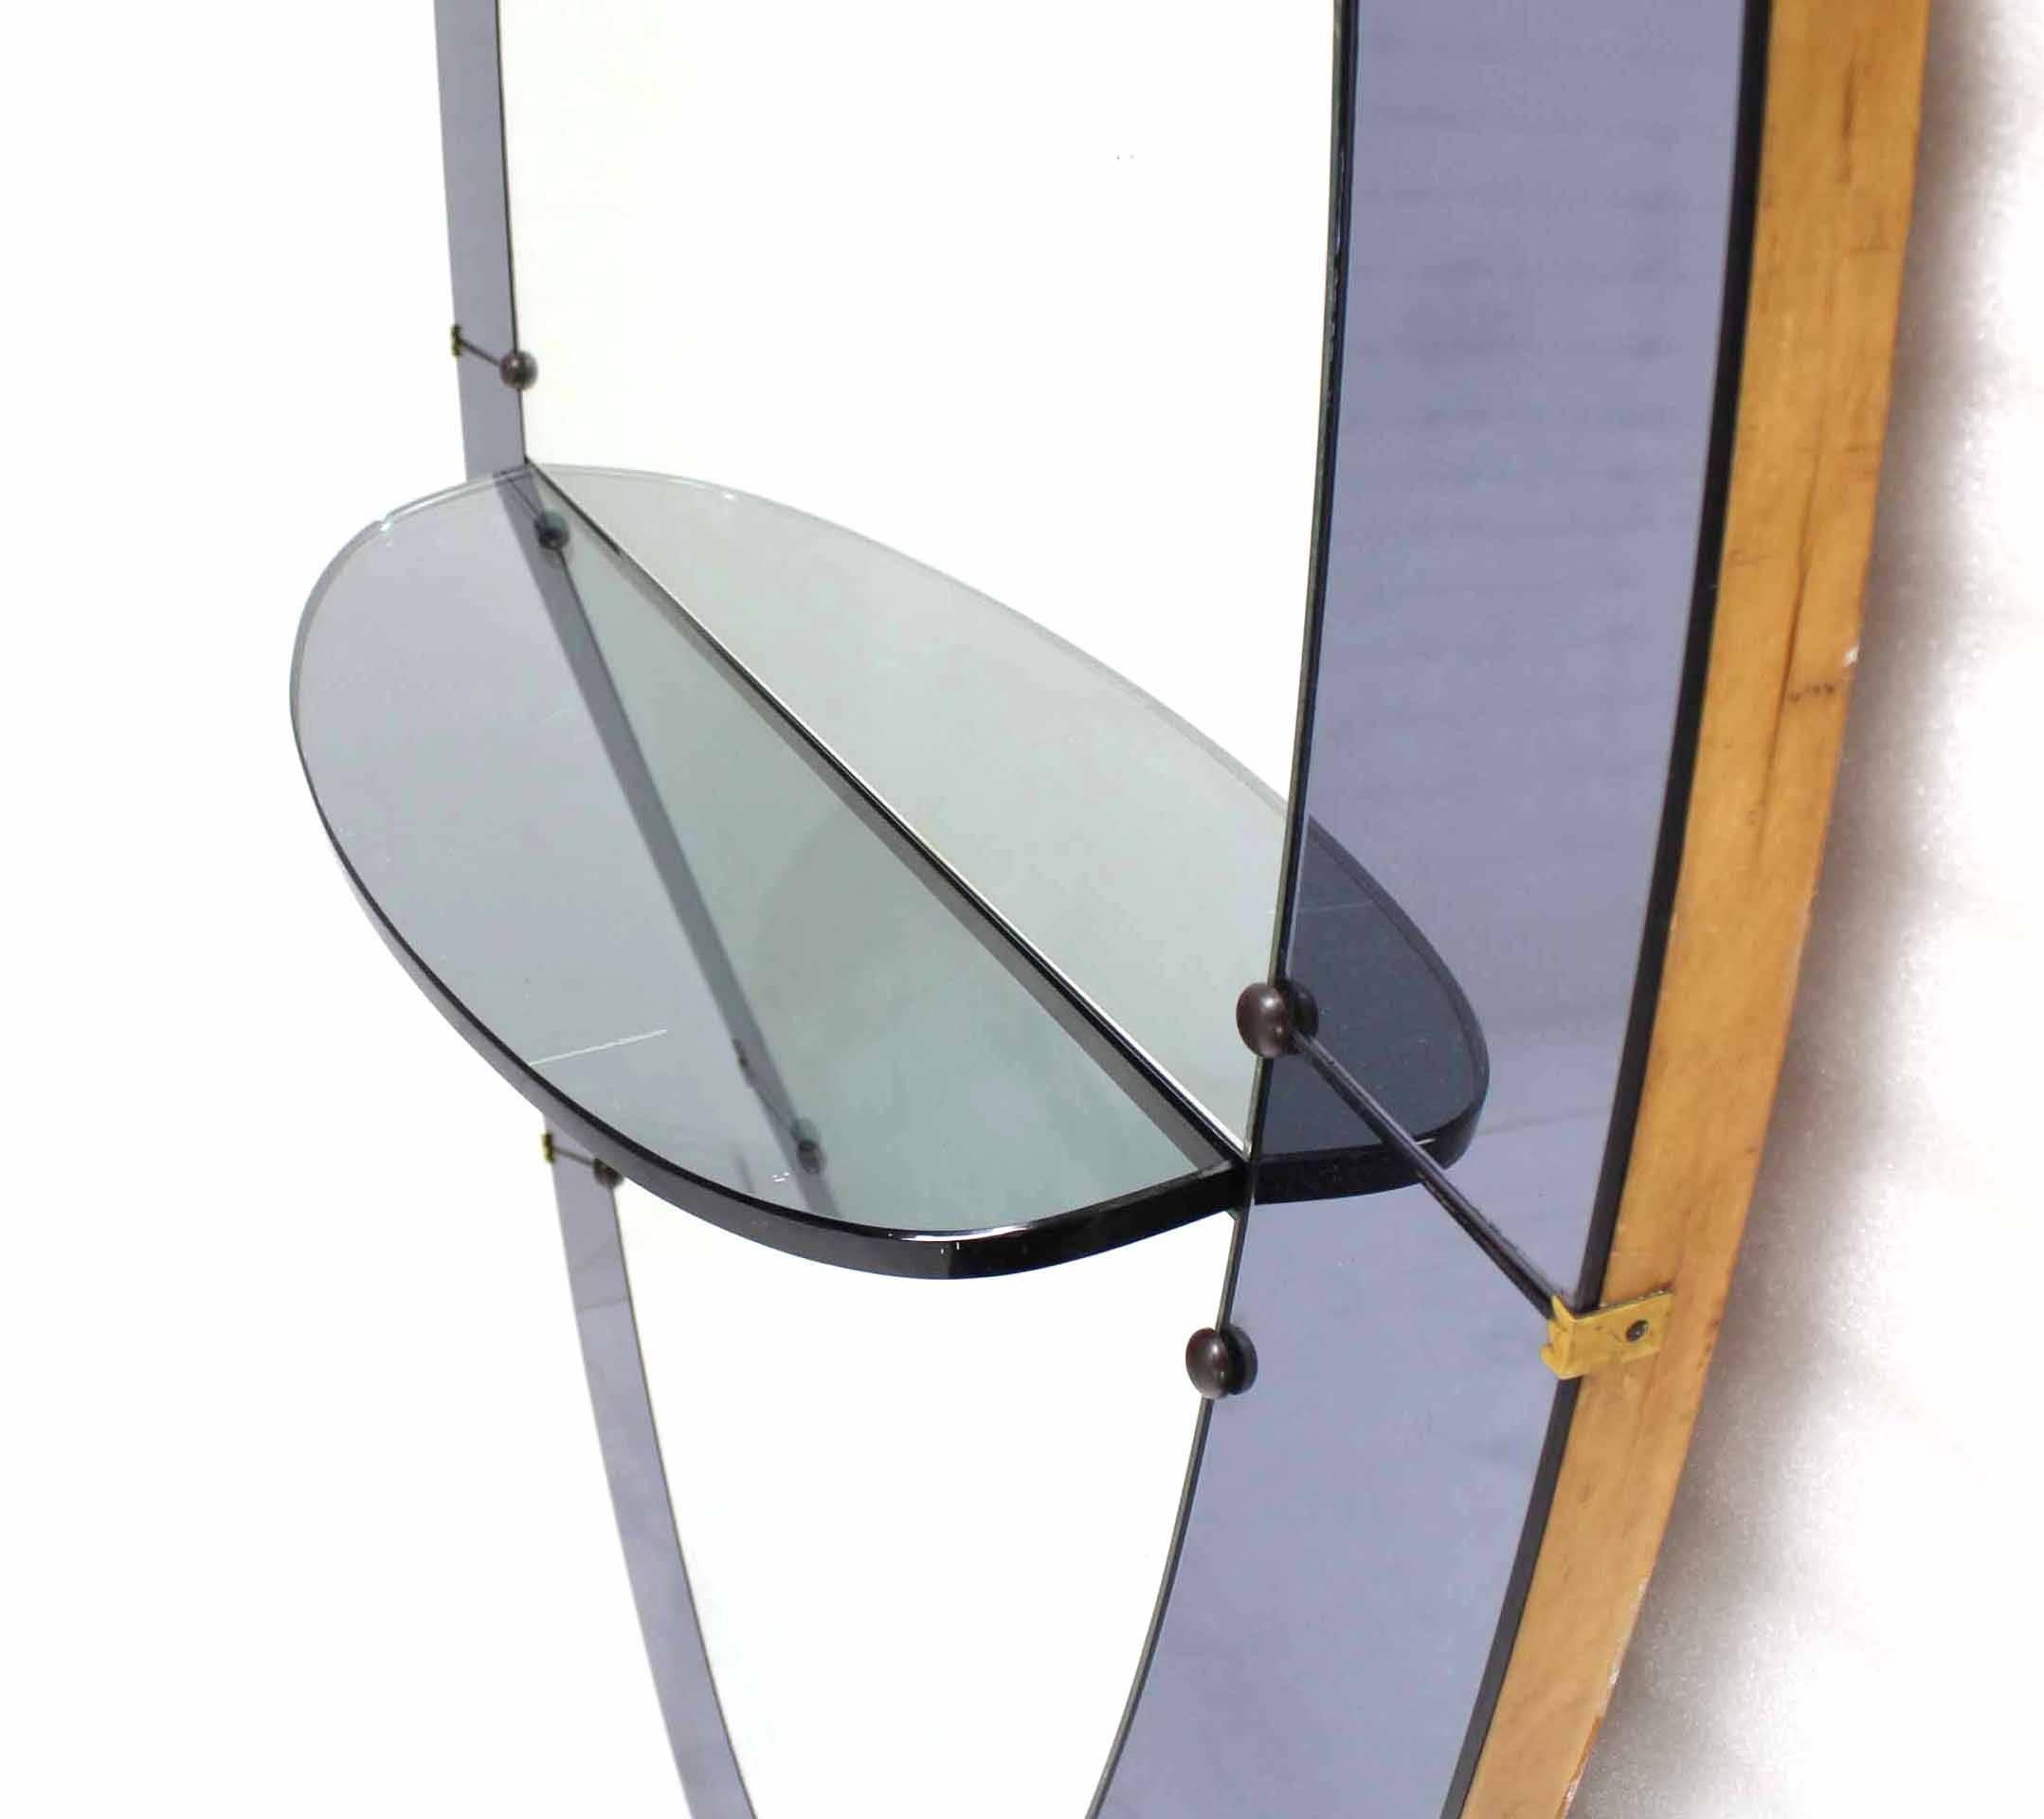 American Large Seven Feet Tall Oval Cheval Art Deco Floor Mirror with Shelf Vanity